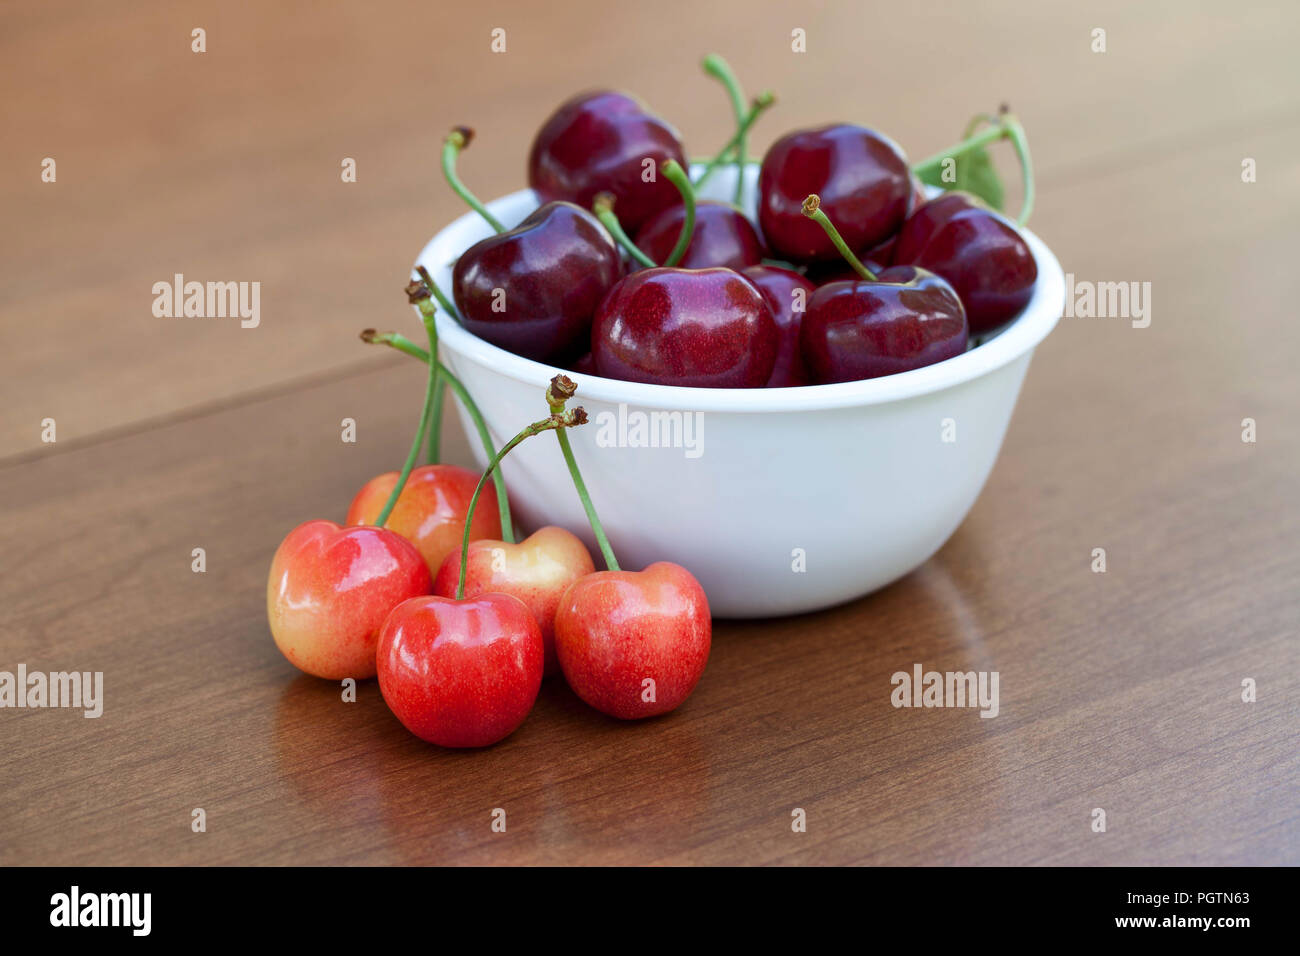 Red ripe cherries in a bowl and rainier cherries on table Stock Photo